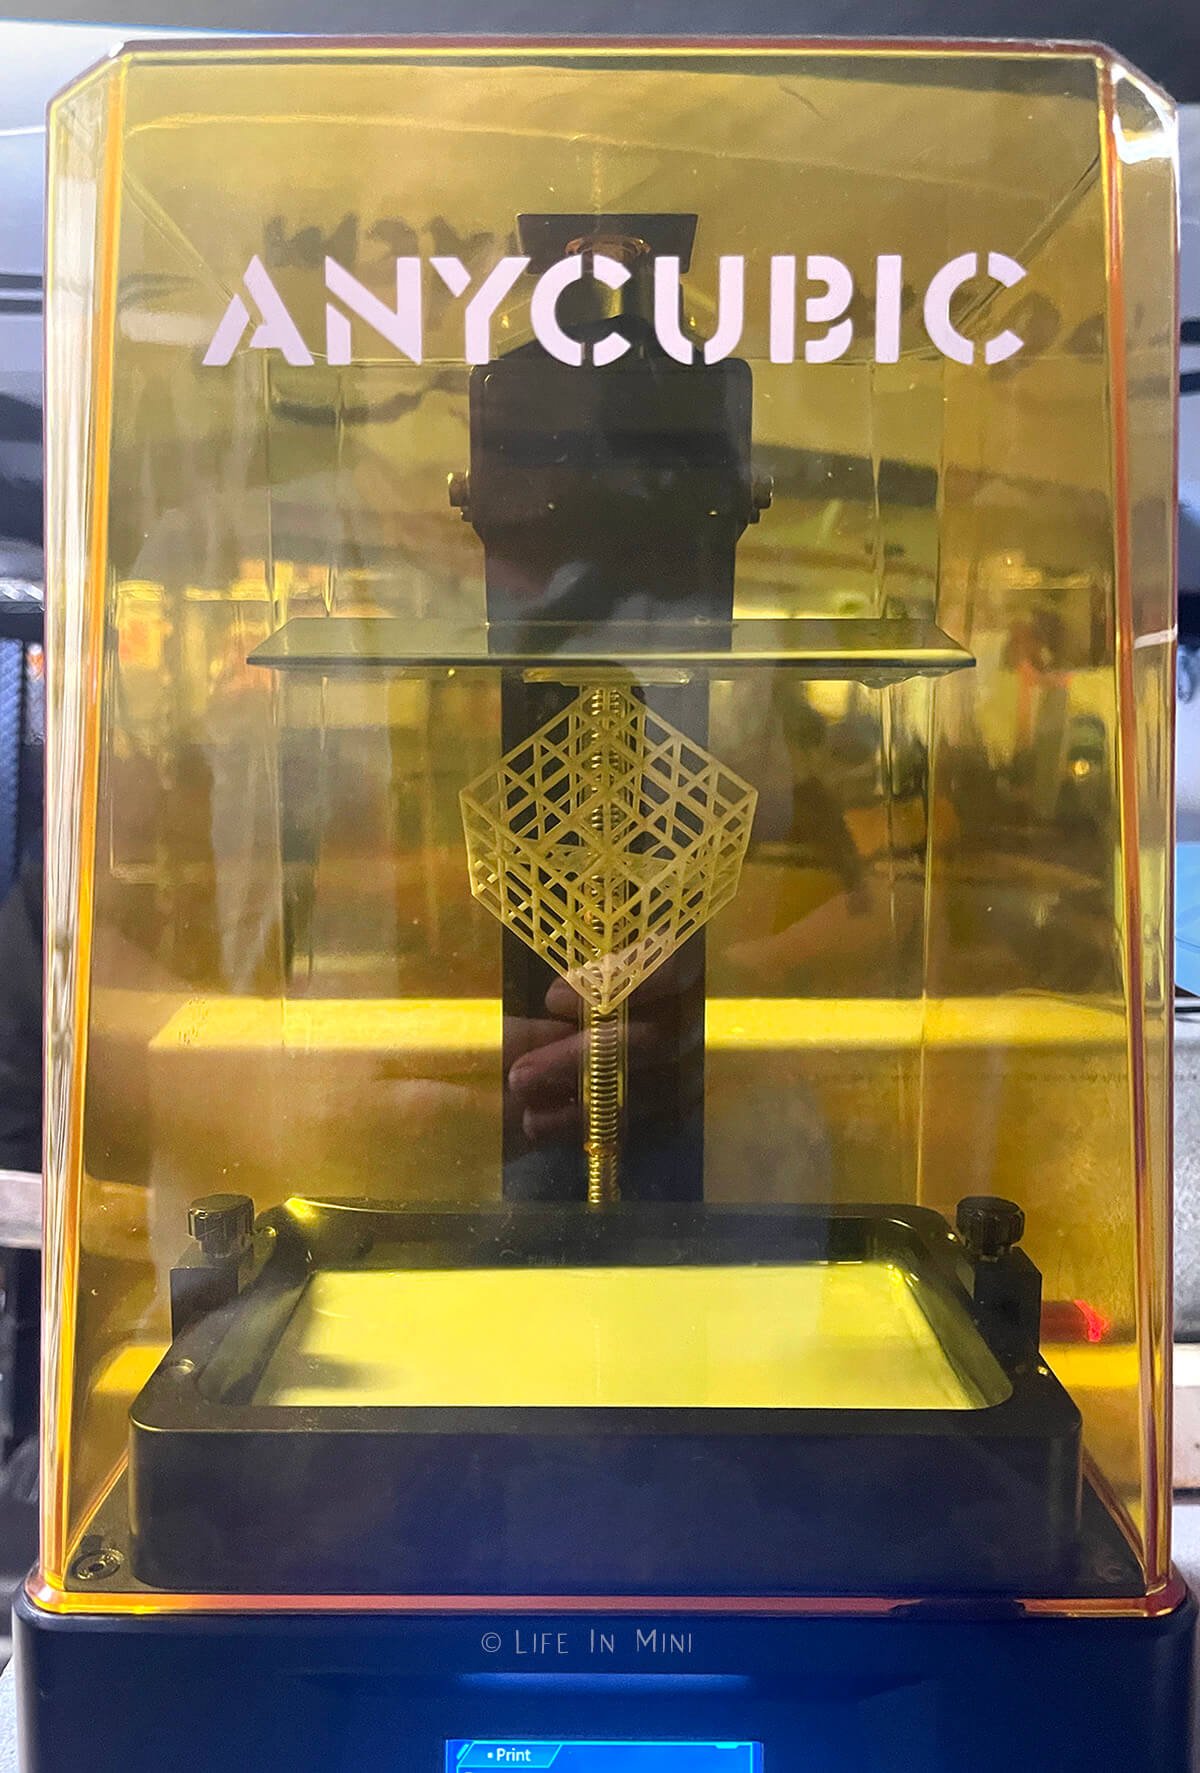 Anycubic 3D Printer in my garage